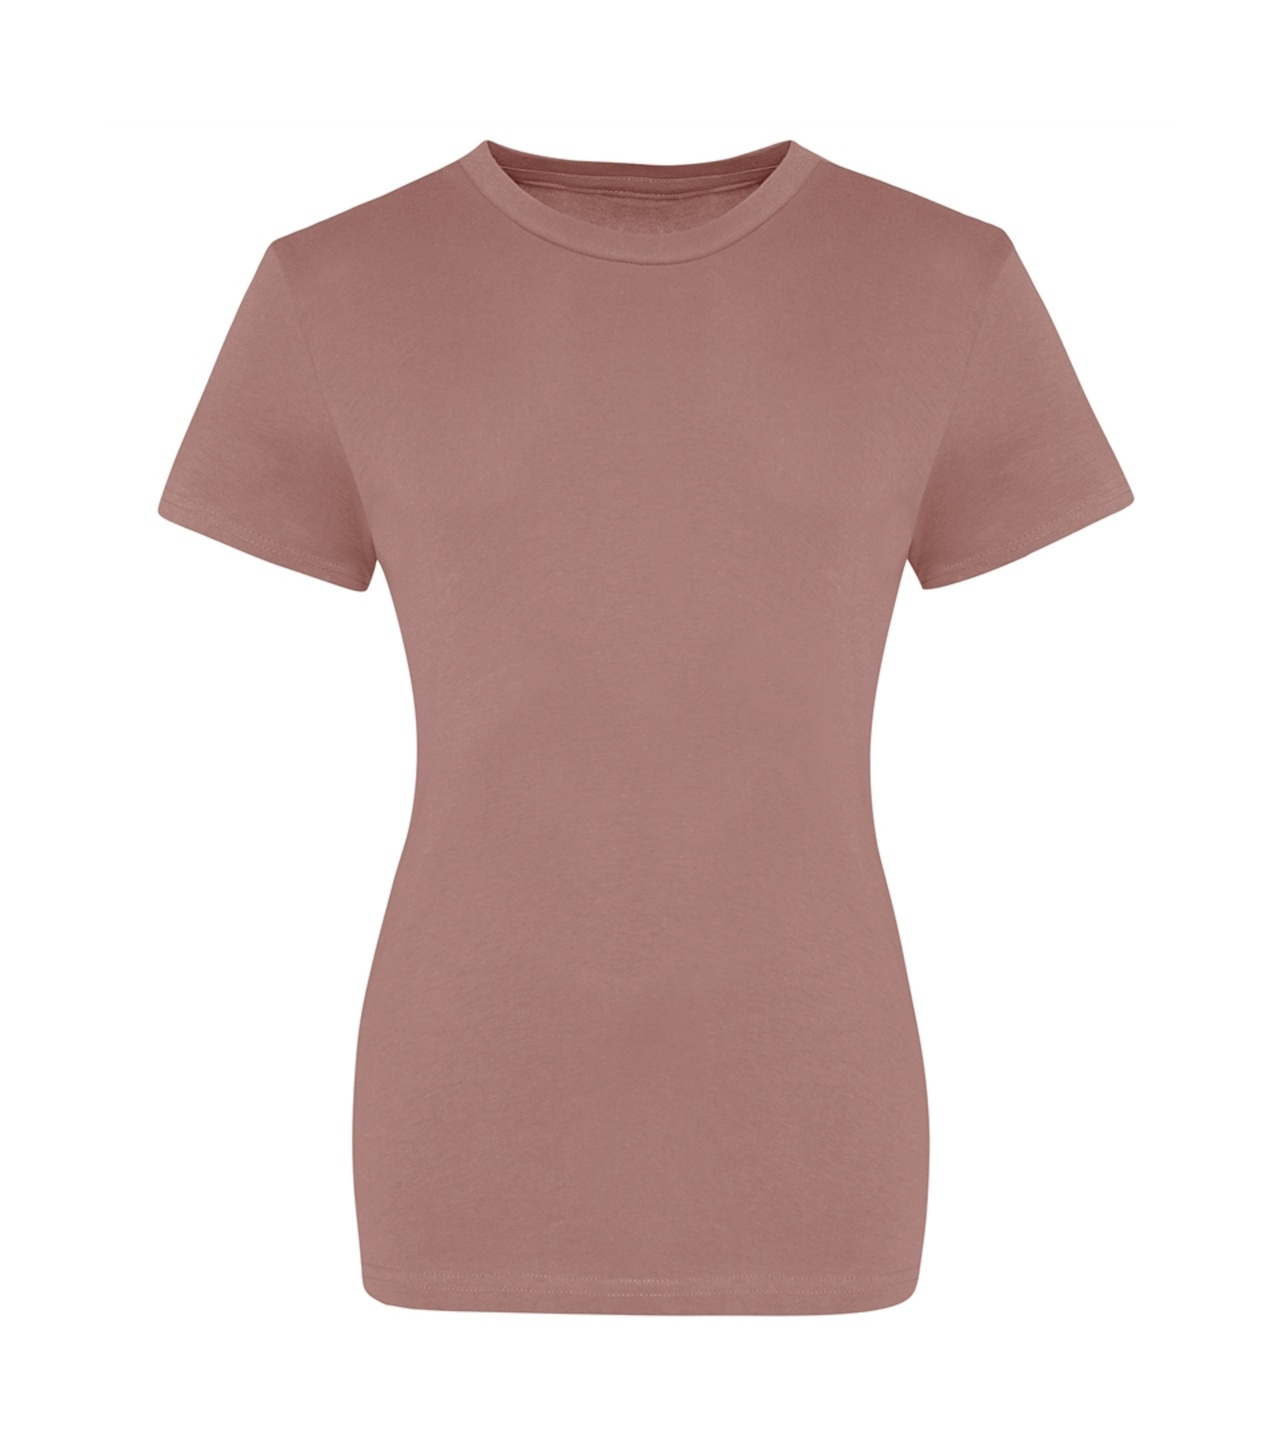 Just Ts The 100 Women's T - Dusty Pink - XL